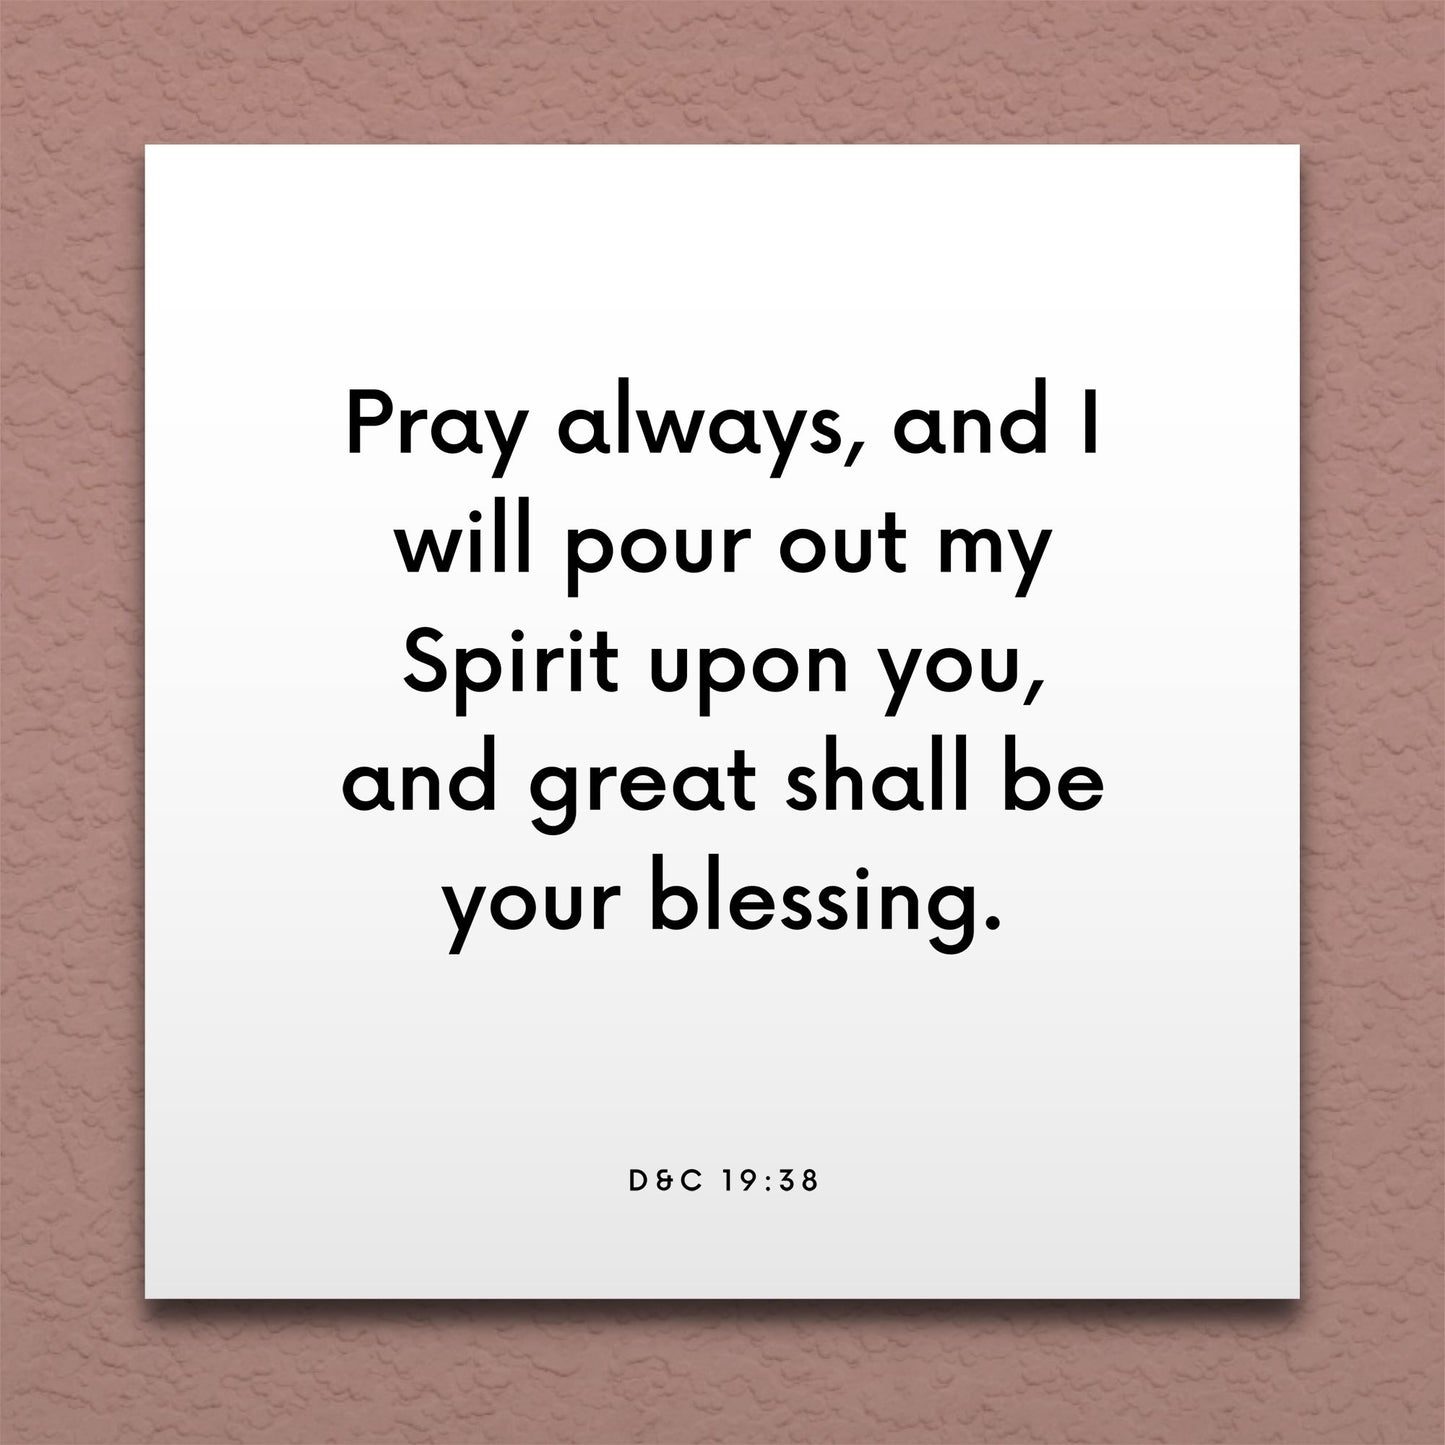 Wall-mounted scripture tile for D&C 19:38 - "Pray always, and I will pour out my Spirit upon you"